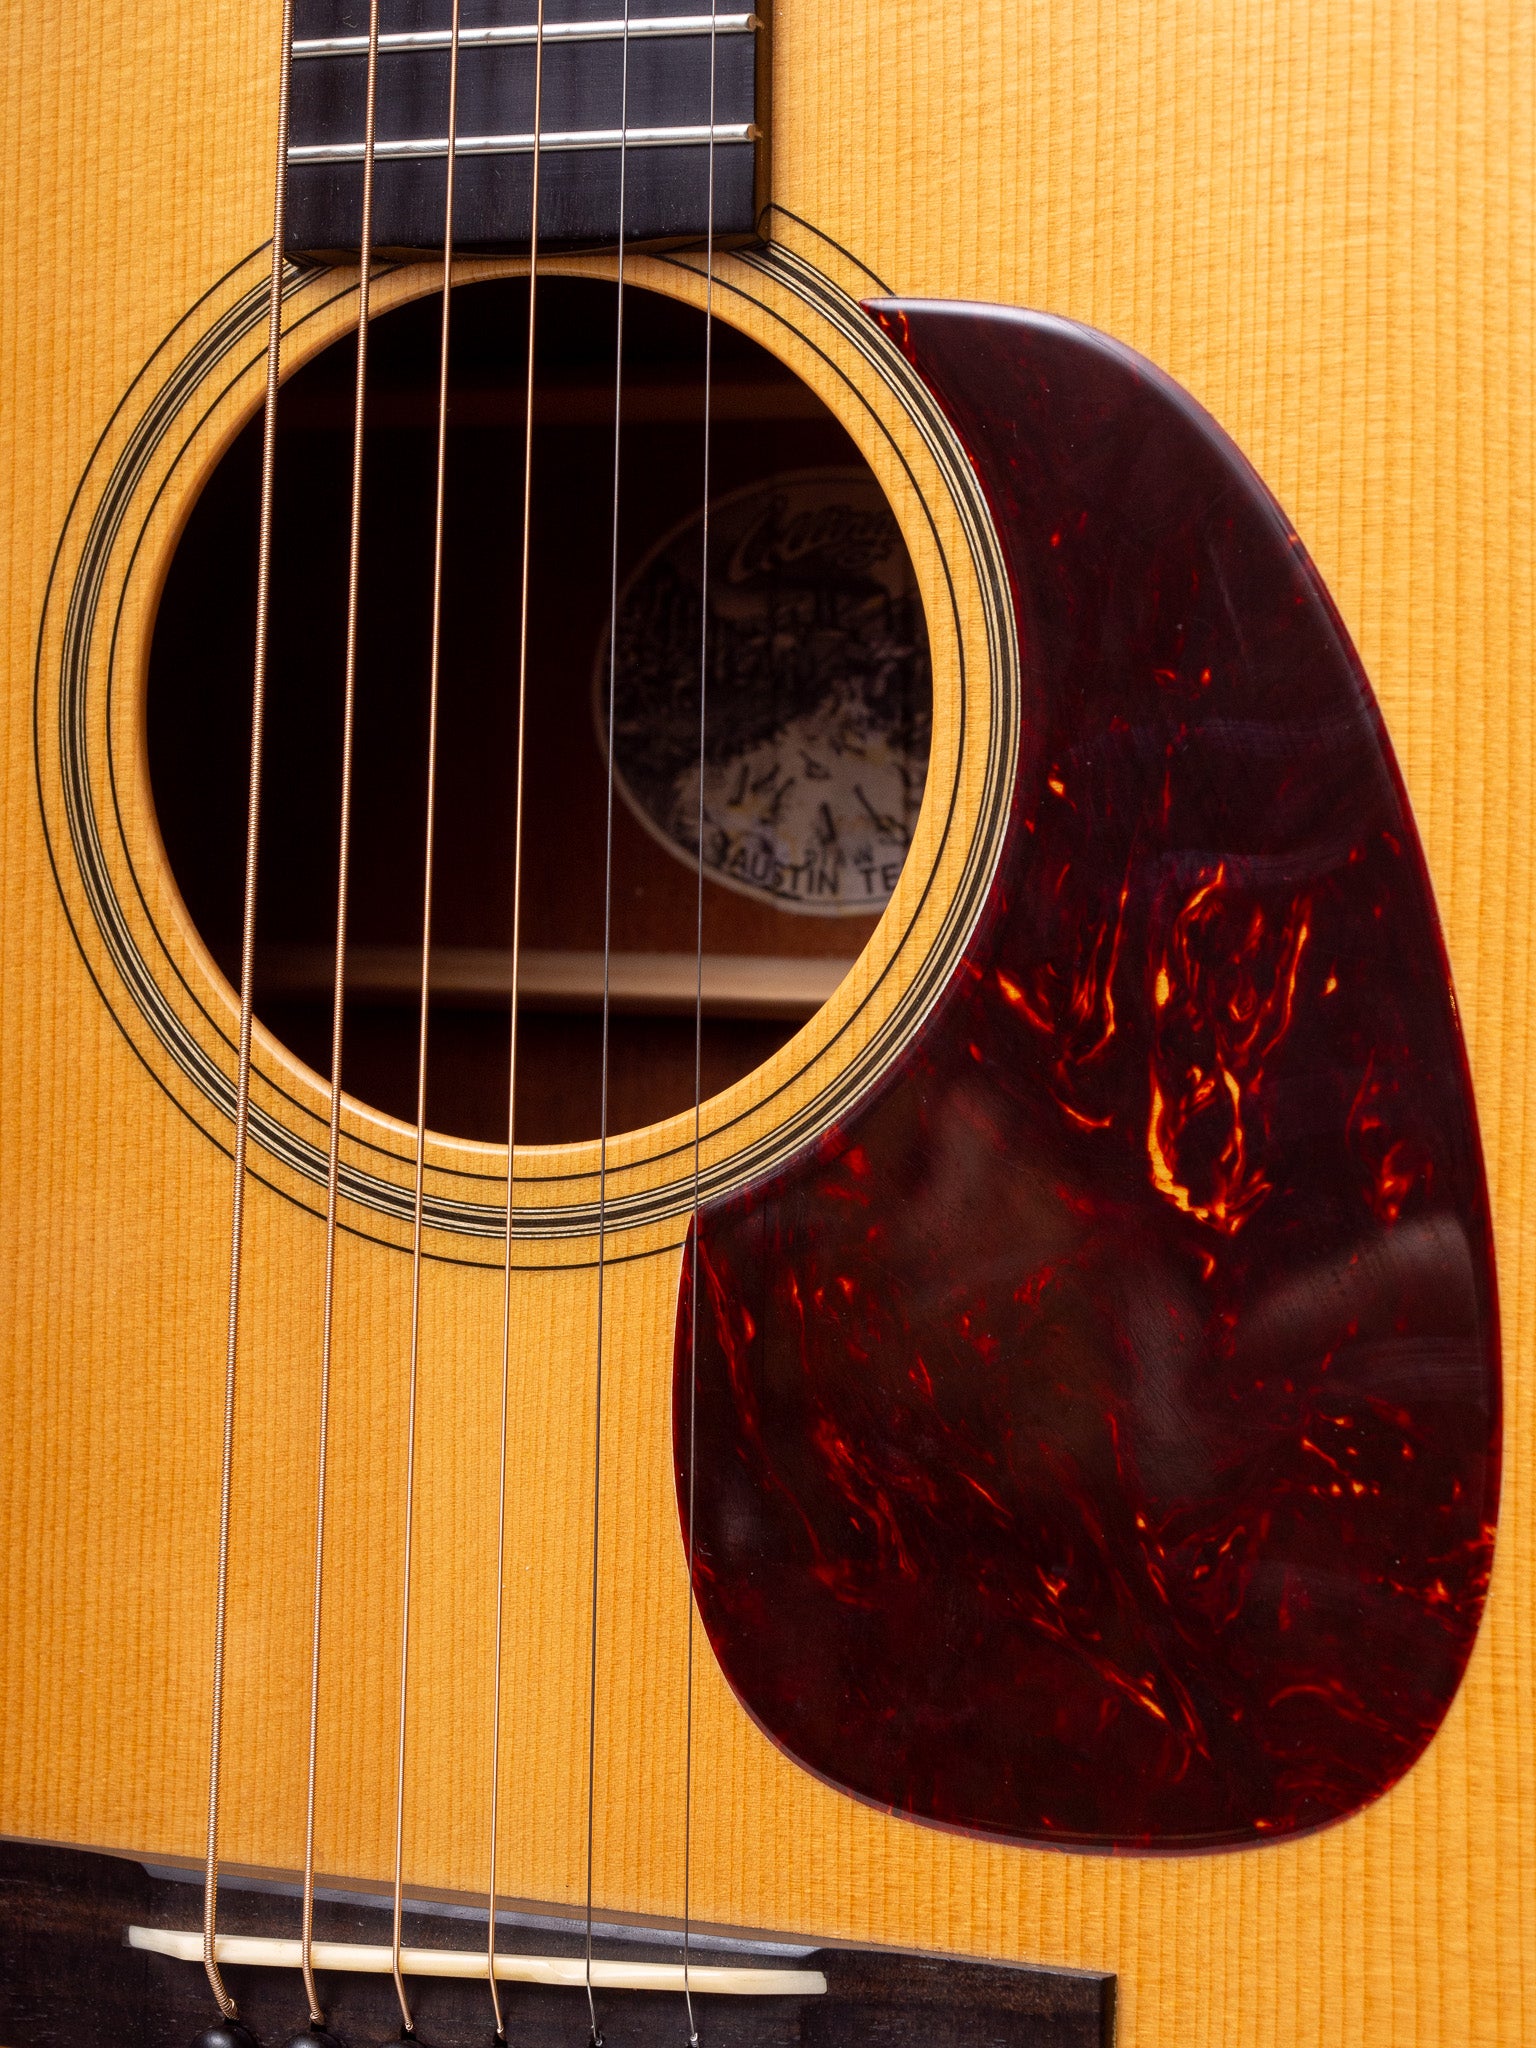 2014 Collings D1A VN